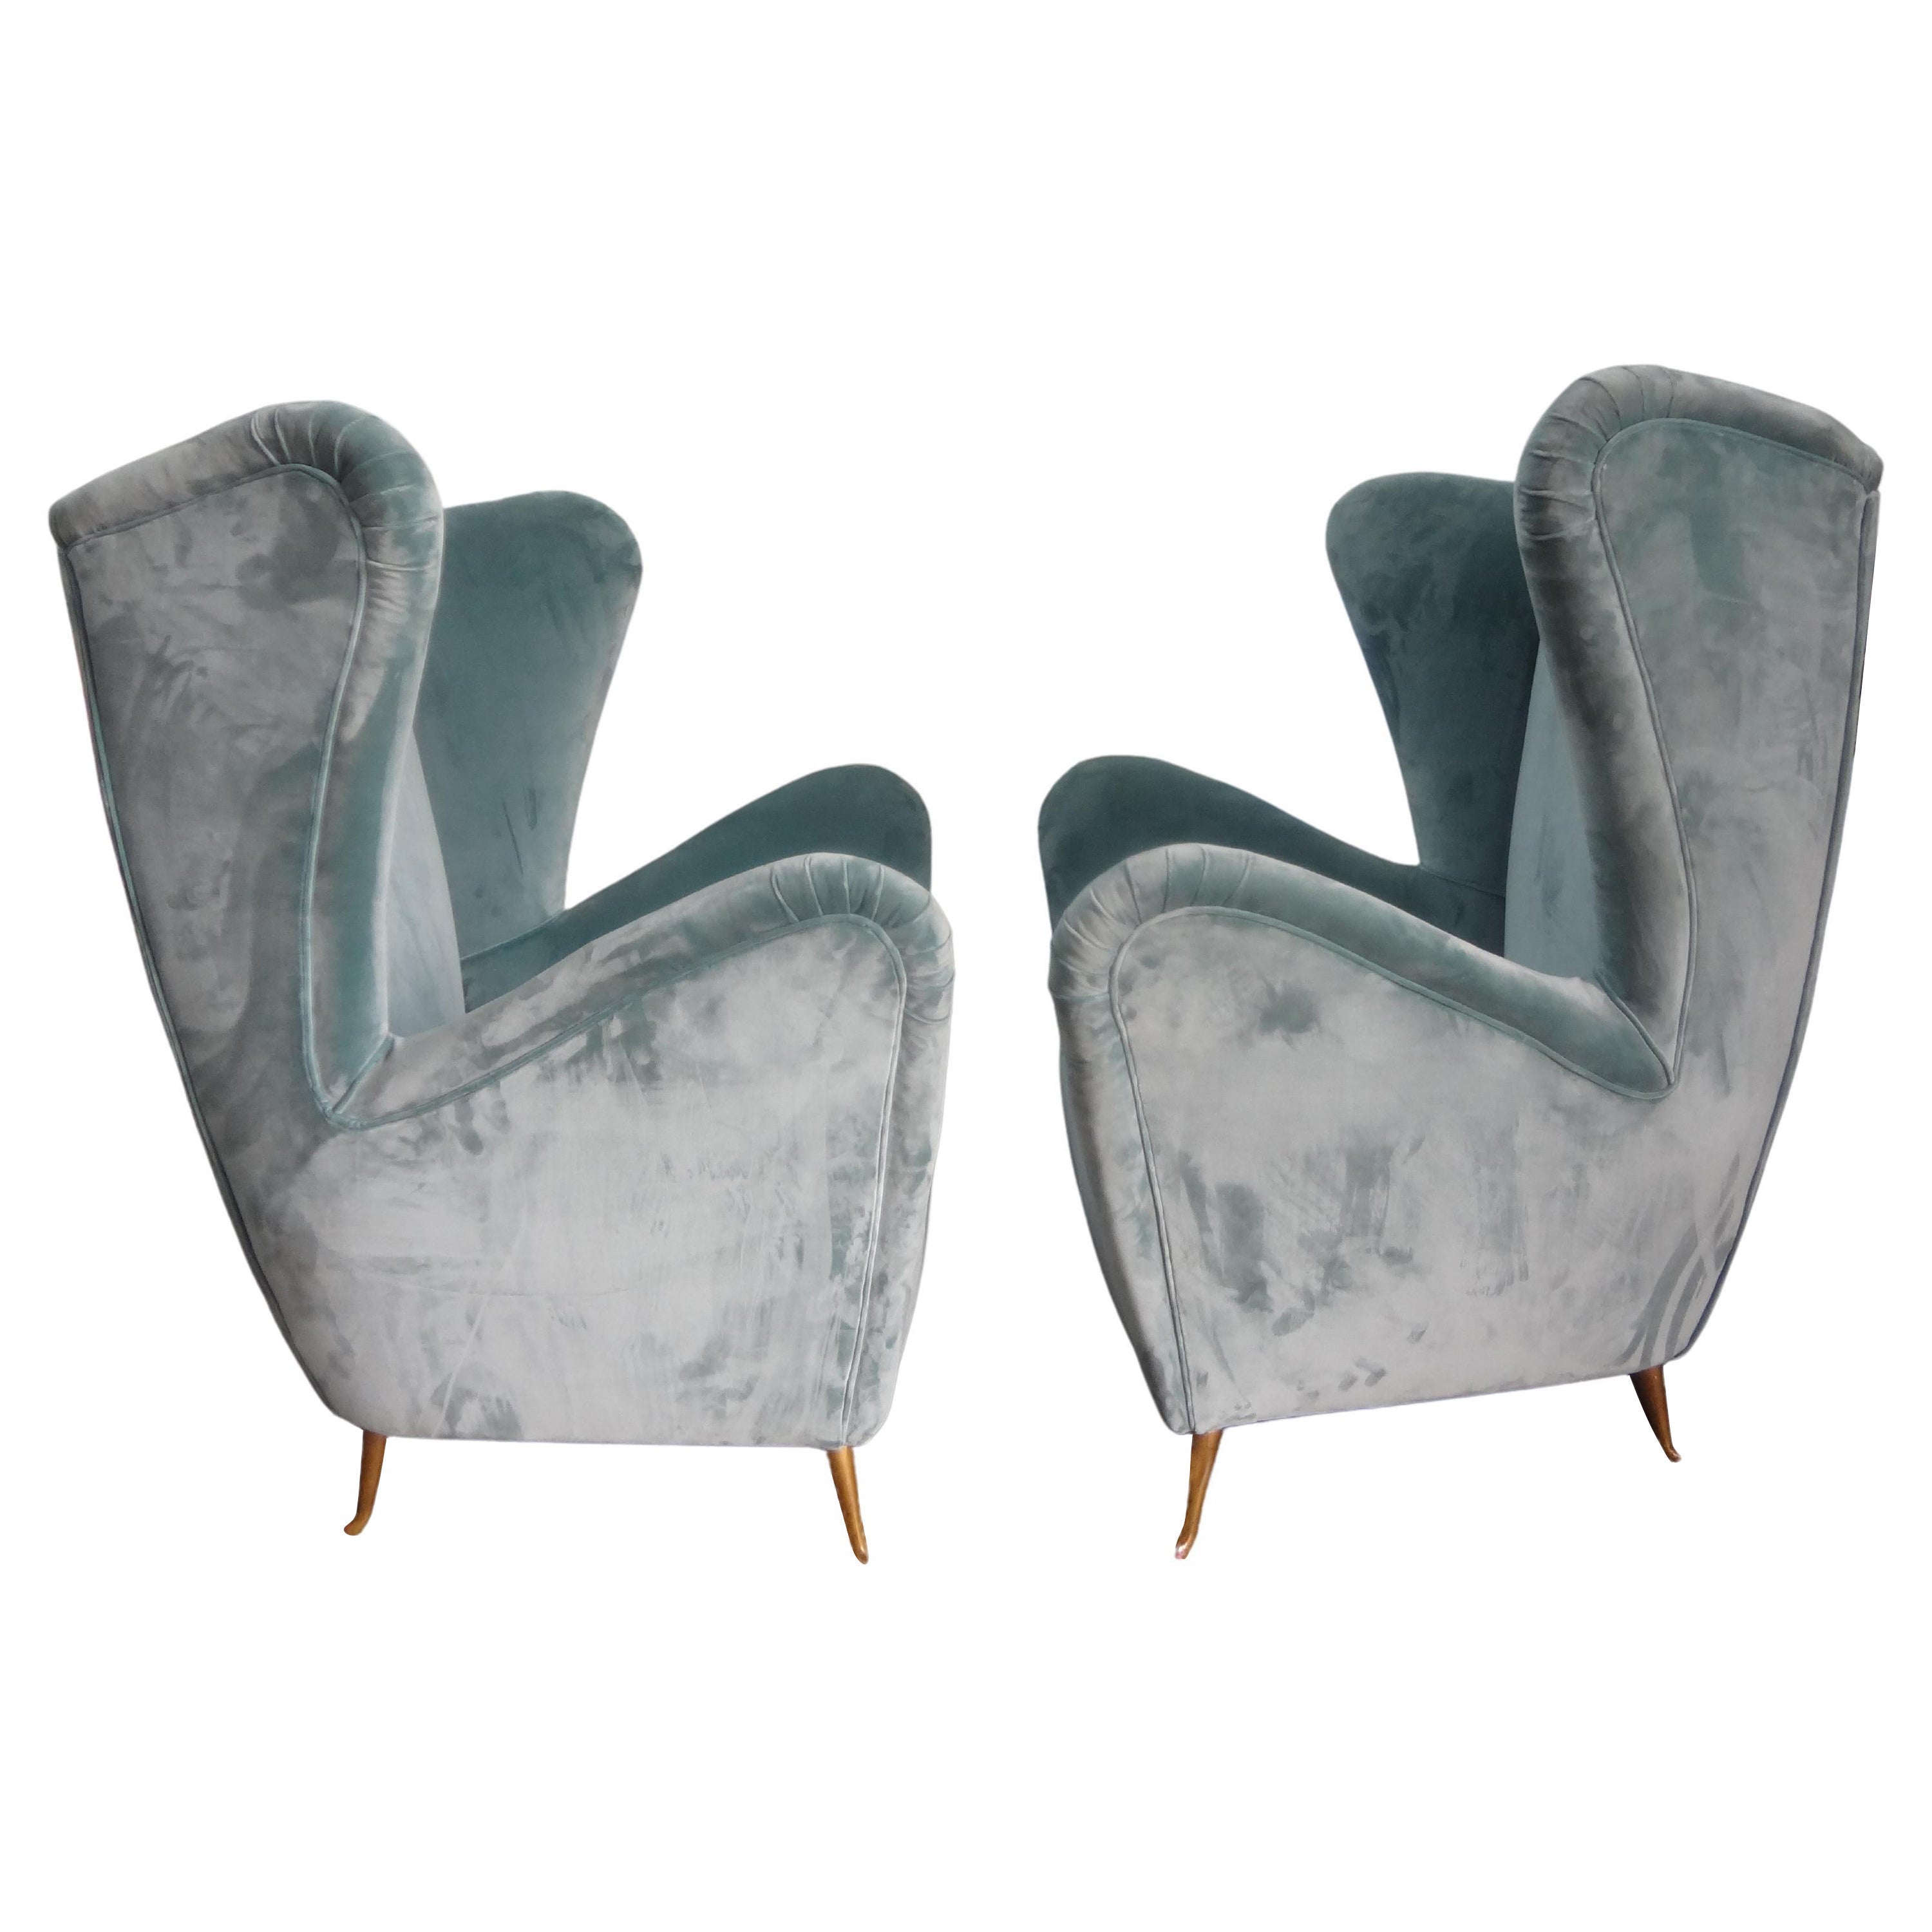 Pair of Italian Modern Sculptural Lounge Chairs Attributed to ISA Bergamo For Sale